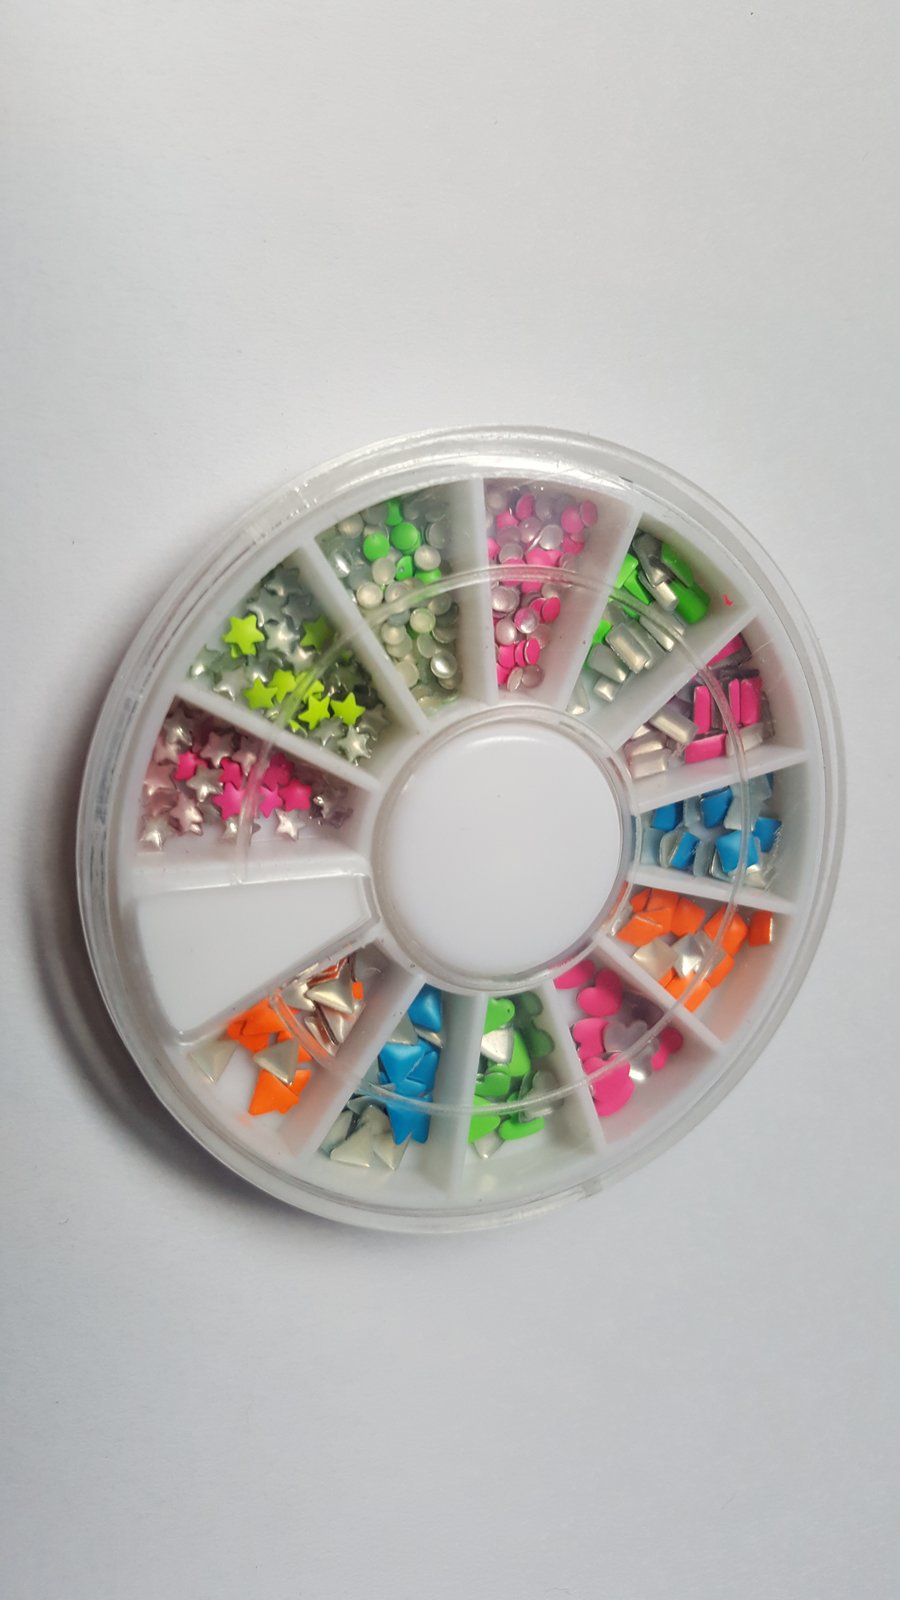 1 x Filled Storage Wheel - 6cm - Tiny Mixed Shaped Studs - Mixed Colour 